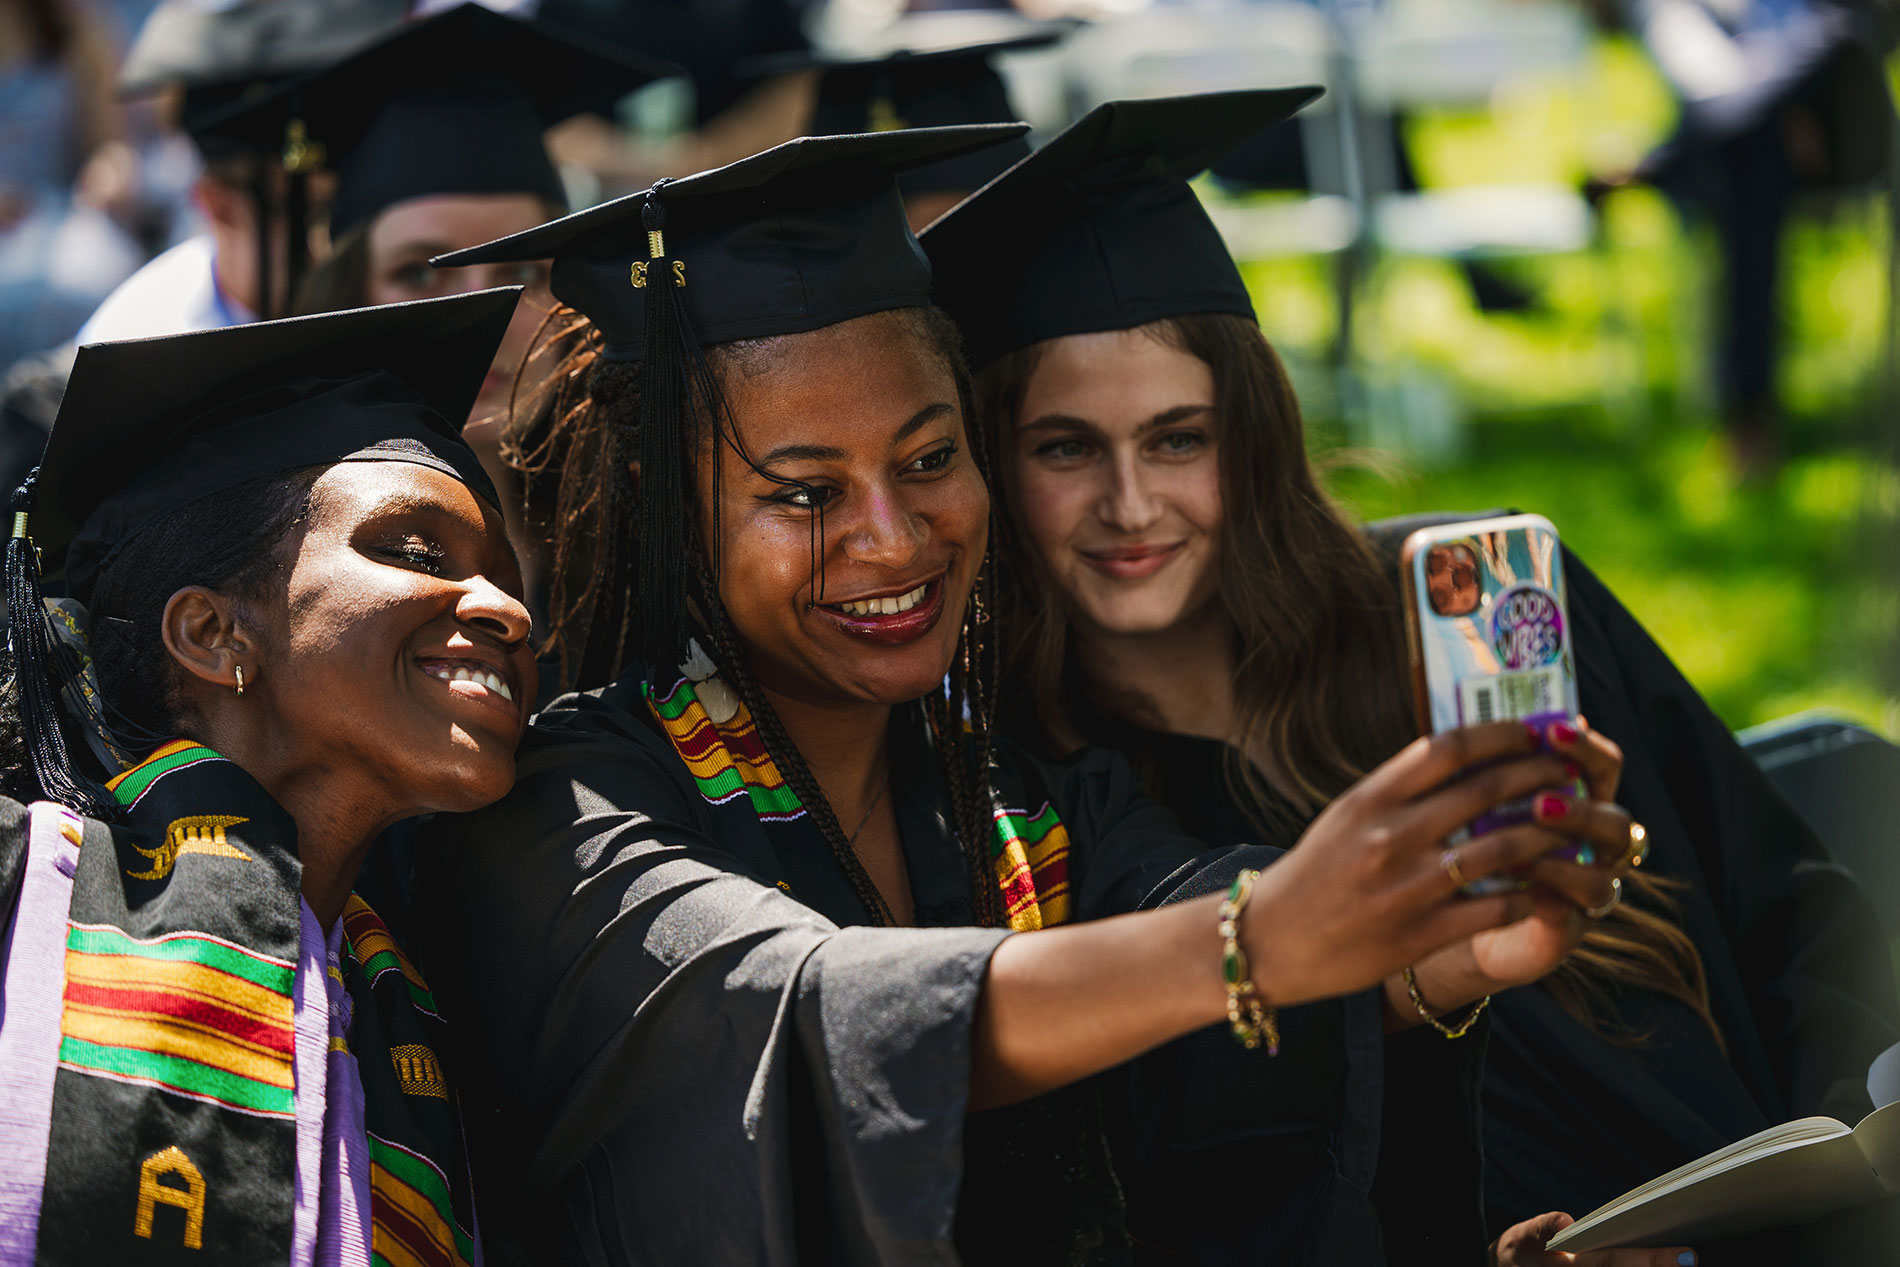 Three students take a selfie together.